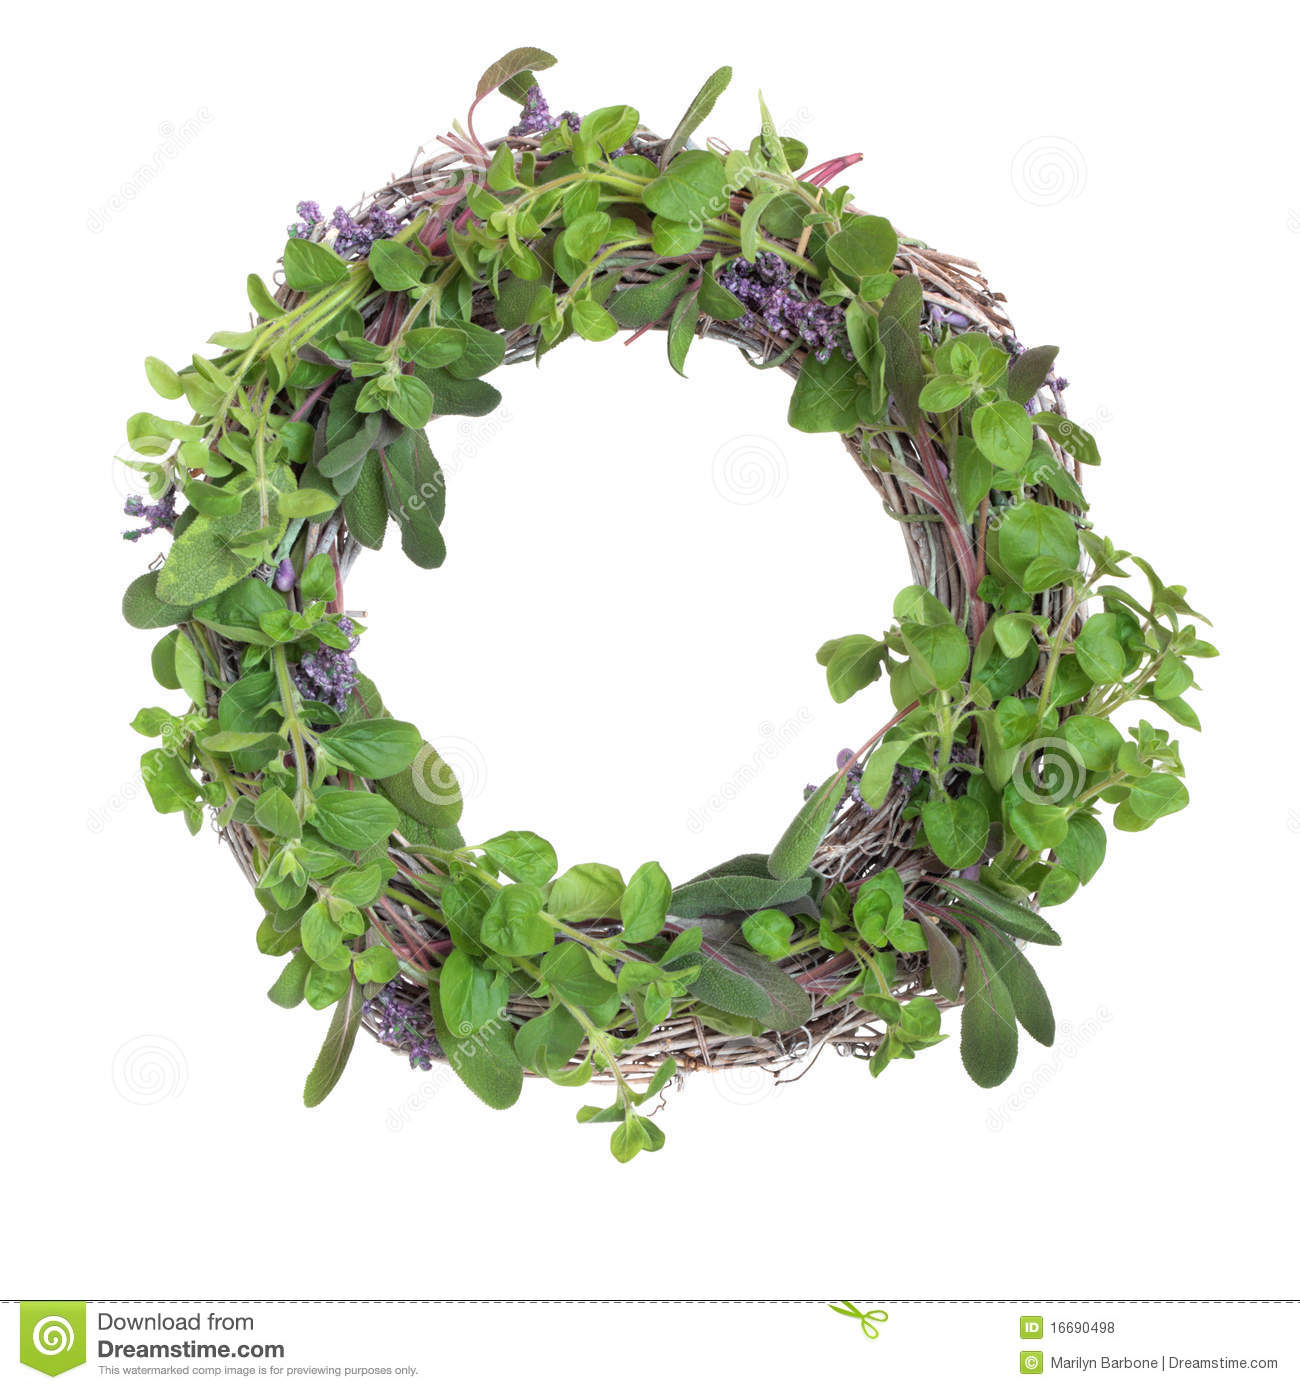 Herb Leaf Garland With Purple And Variegated Sage Oregano Basil And